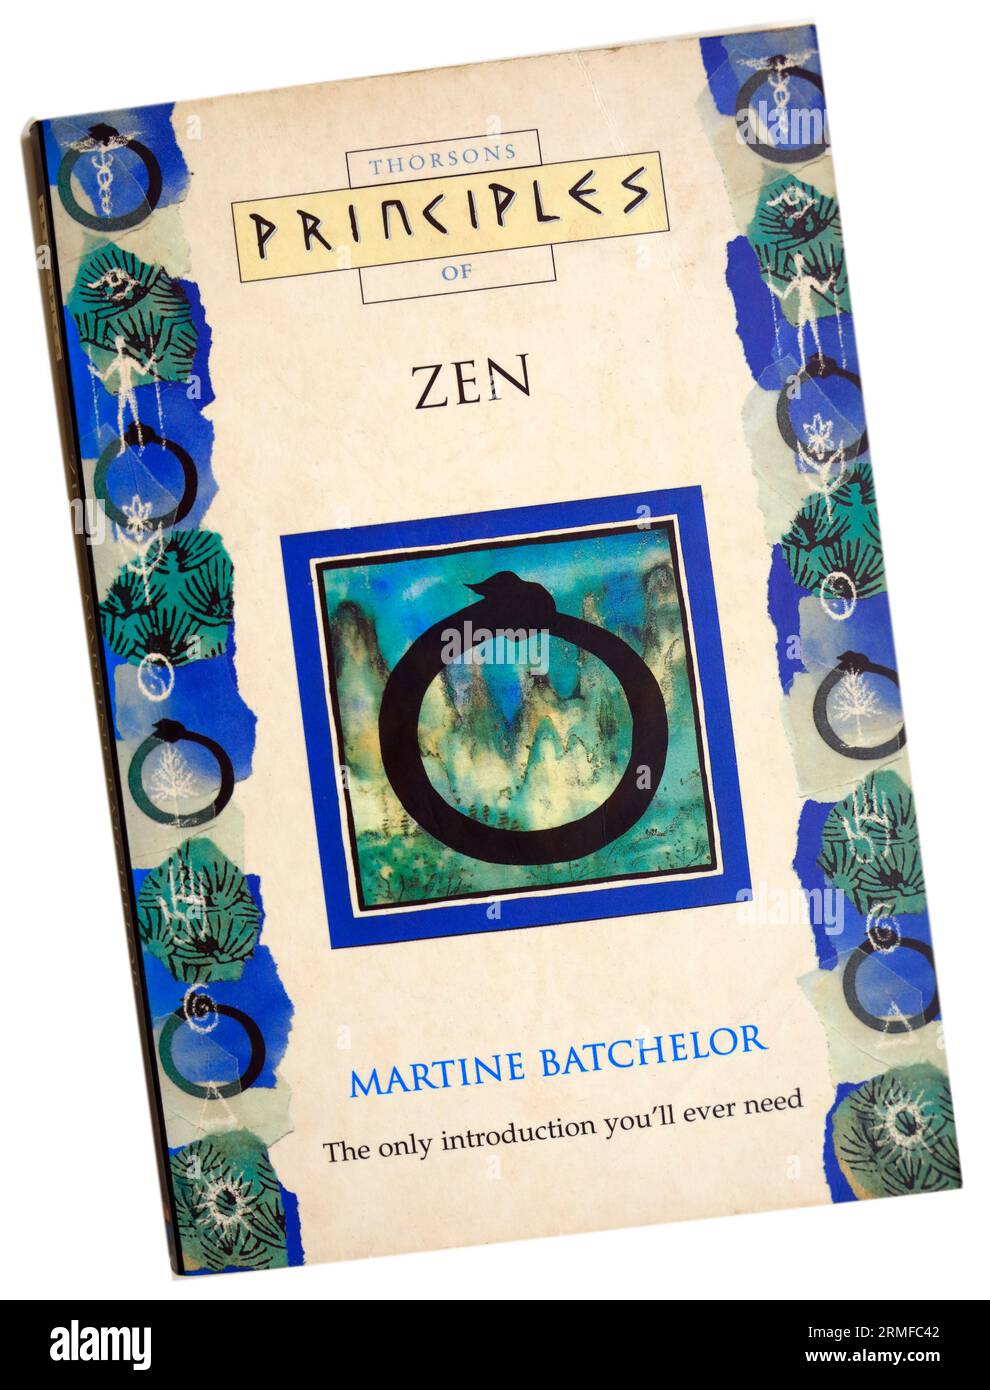 Thorson's Principles of Zen paperback Book cover on white background by Martine Batchelor. The only introduction you'll ever need. Used. Stock Photo